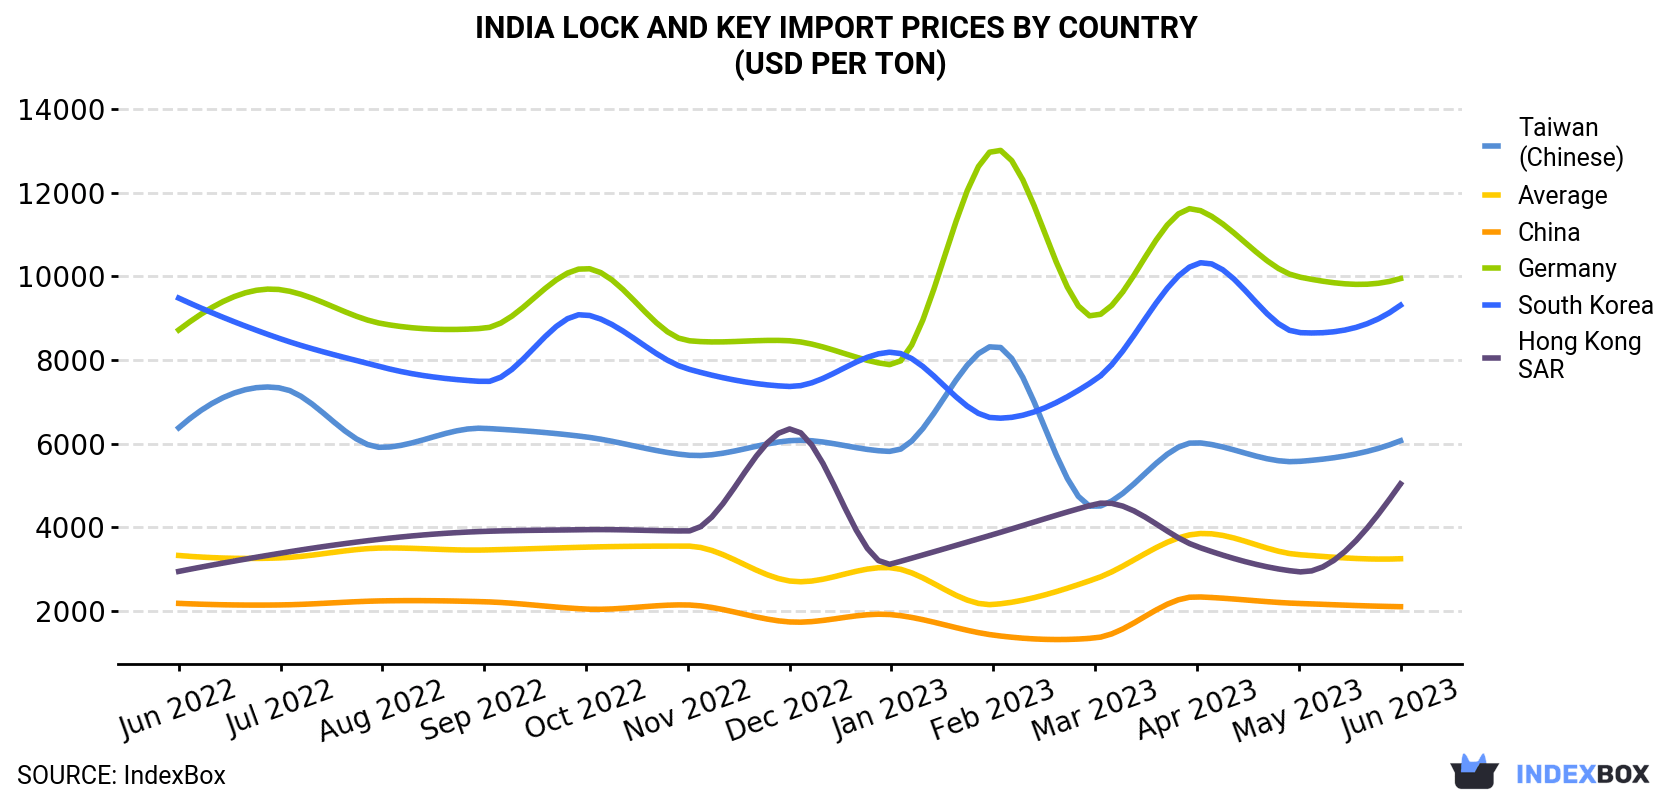 India Lock And Key Import Prices By Country (USD Per Ton)